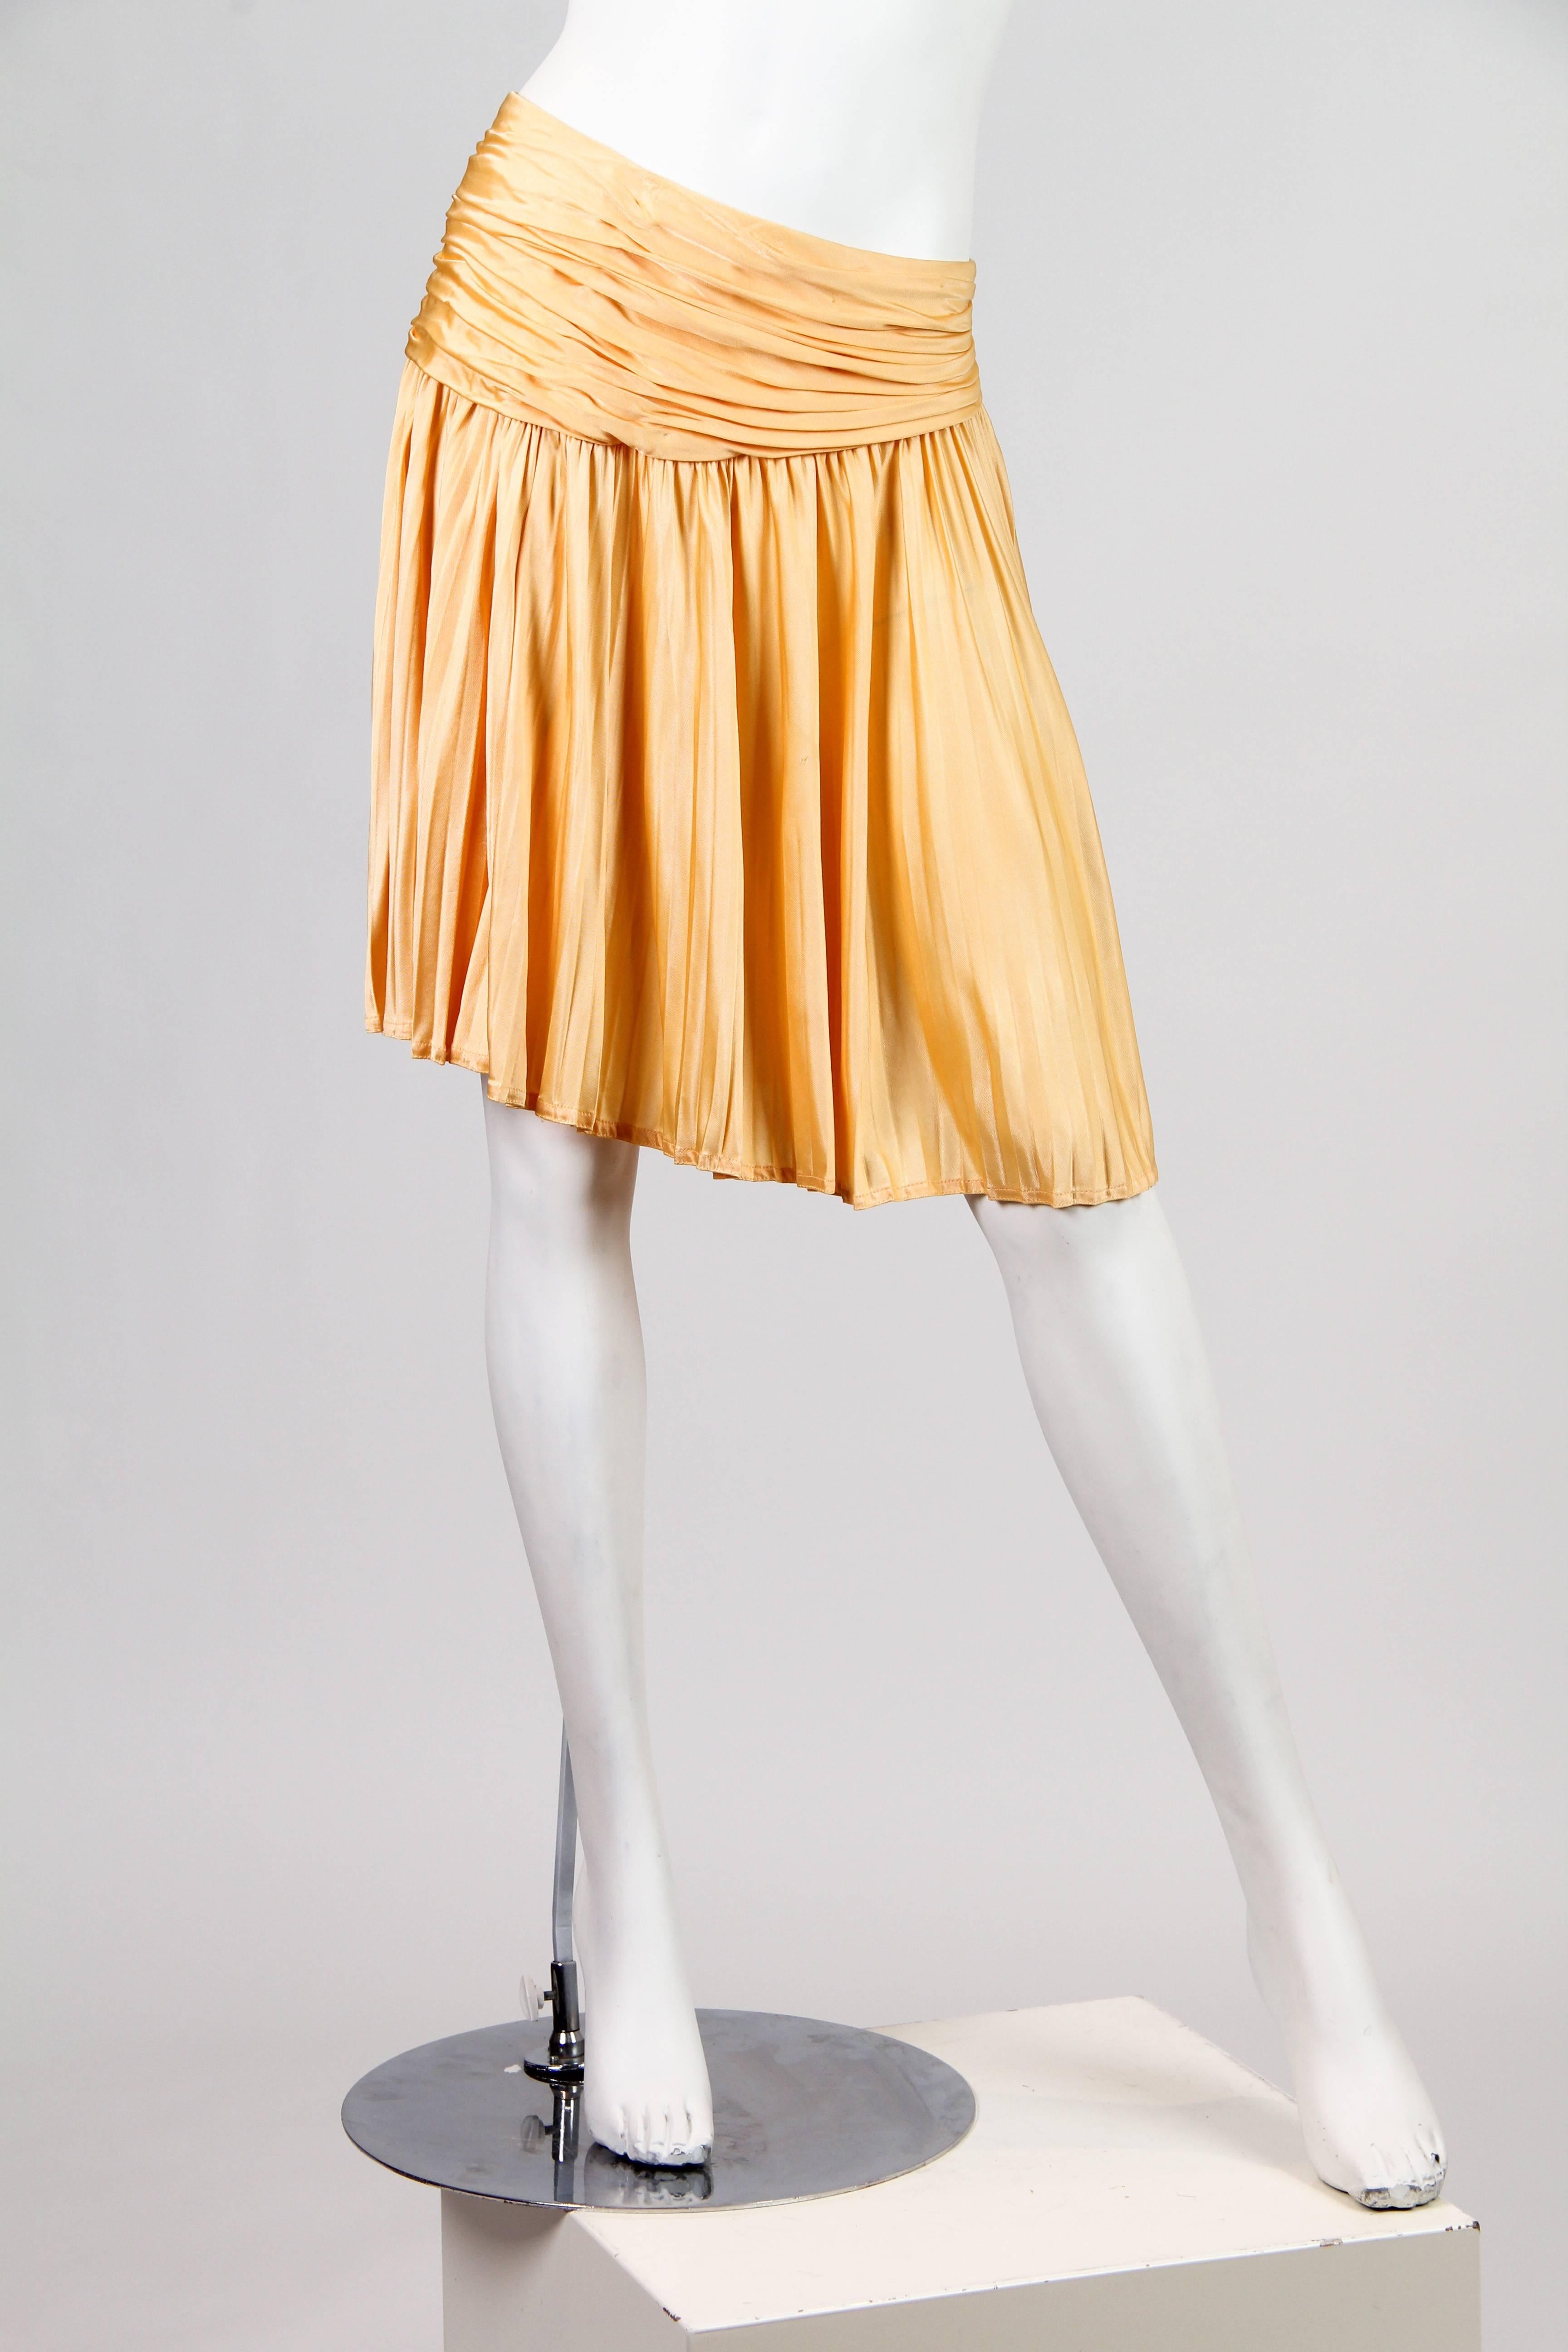 Women's 1990S GIANNI VERSACE Buttercream Yellow Rayon Jersey Mini Skirt With Slit For Sale